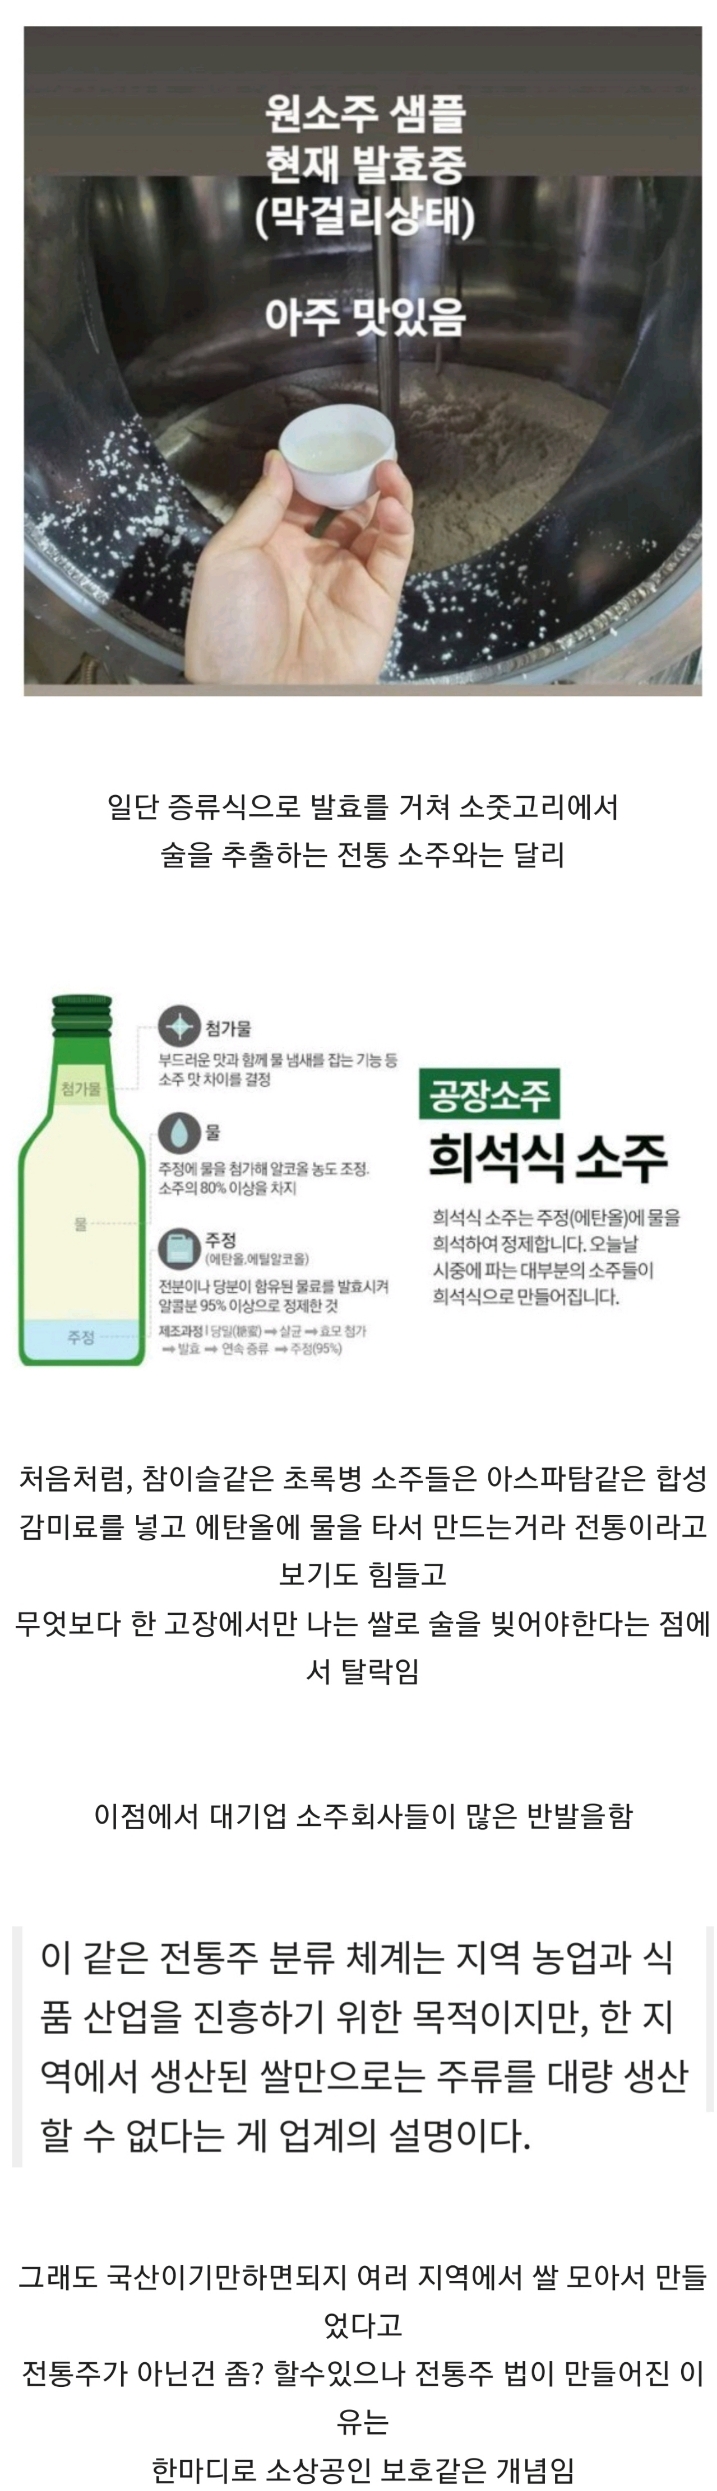 Park Jaebeom, who is being checked as to how traditional soju is made by Park Jaebeom